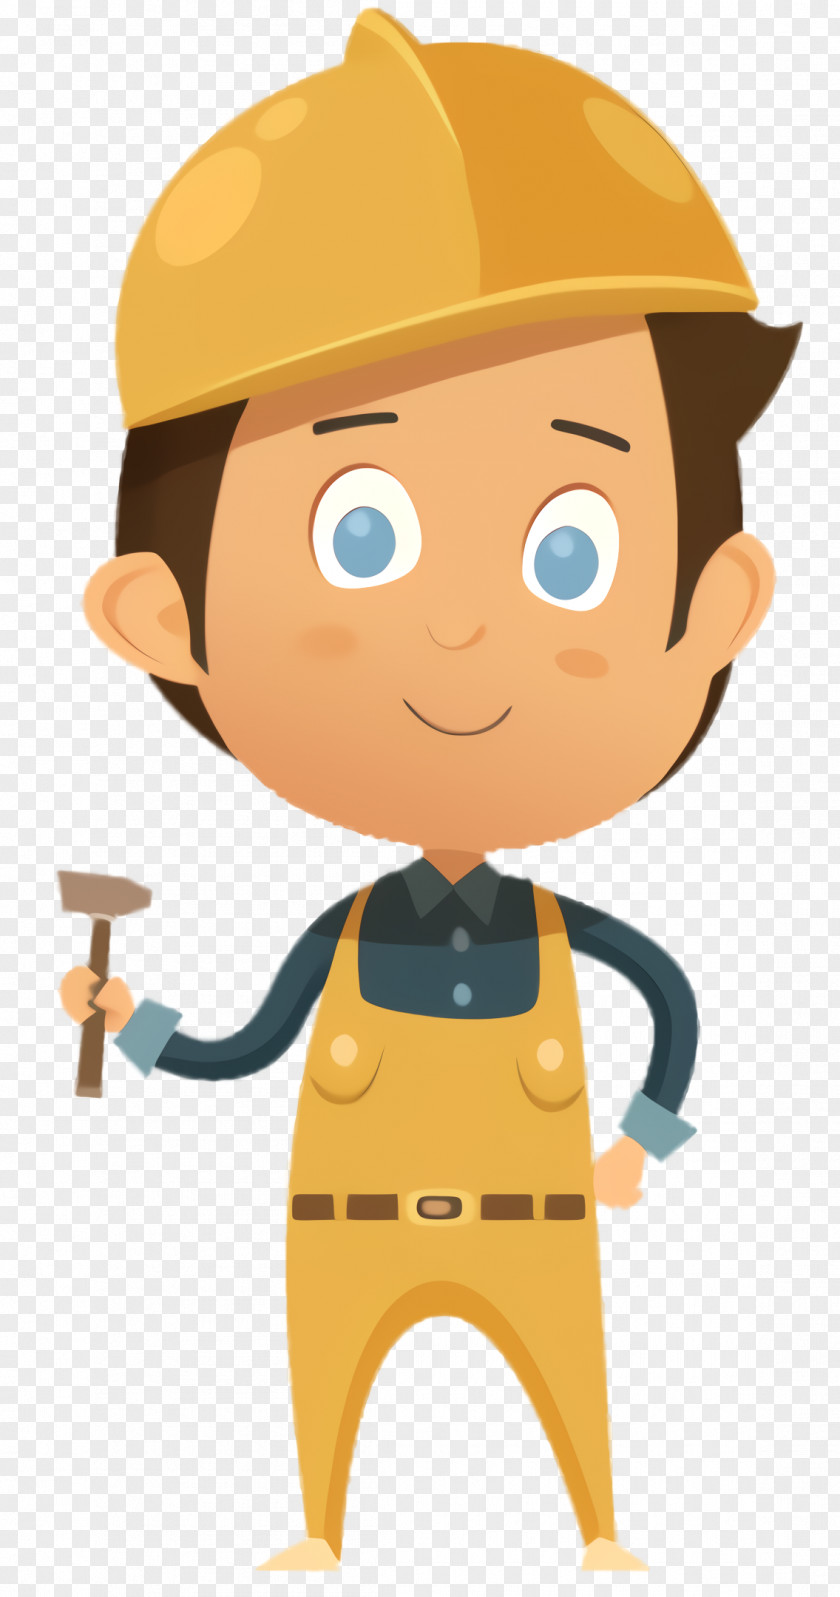 Toy Construction Worker Boy Cartoon PNG